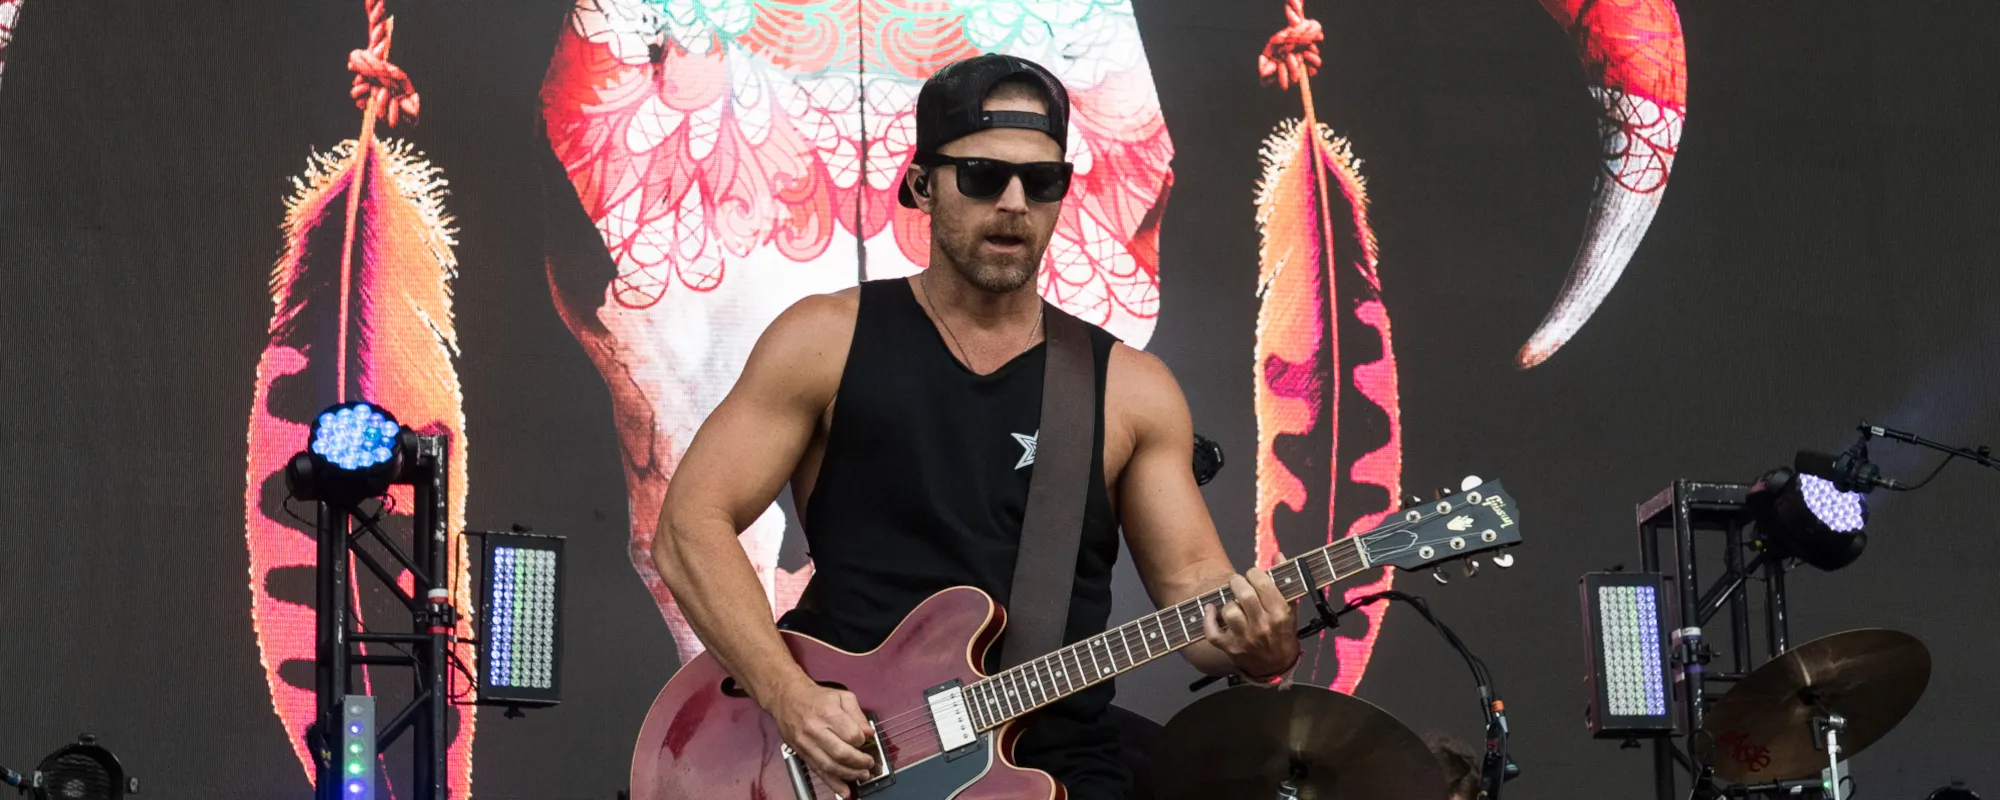 Kip Moore Working on Benefit Concert to Aid Those Impacted by Wildfires in Hawaii